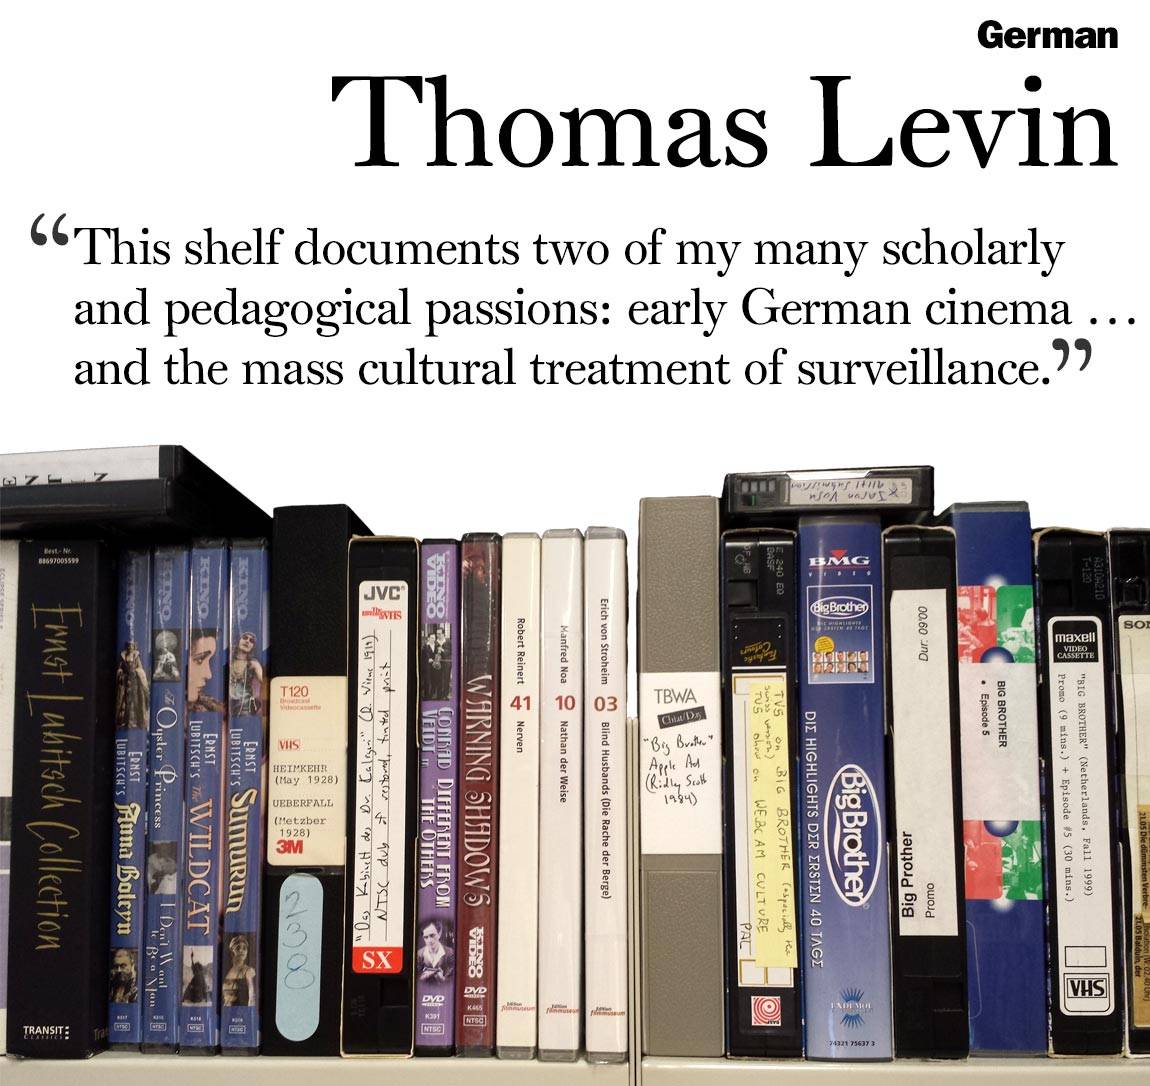 “This shelf documents two of my many scholarly  and pedagogical passions: early German cinema … and the mass cultural treatment of surveillance.” Thomas Levin, german